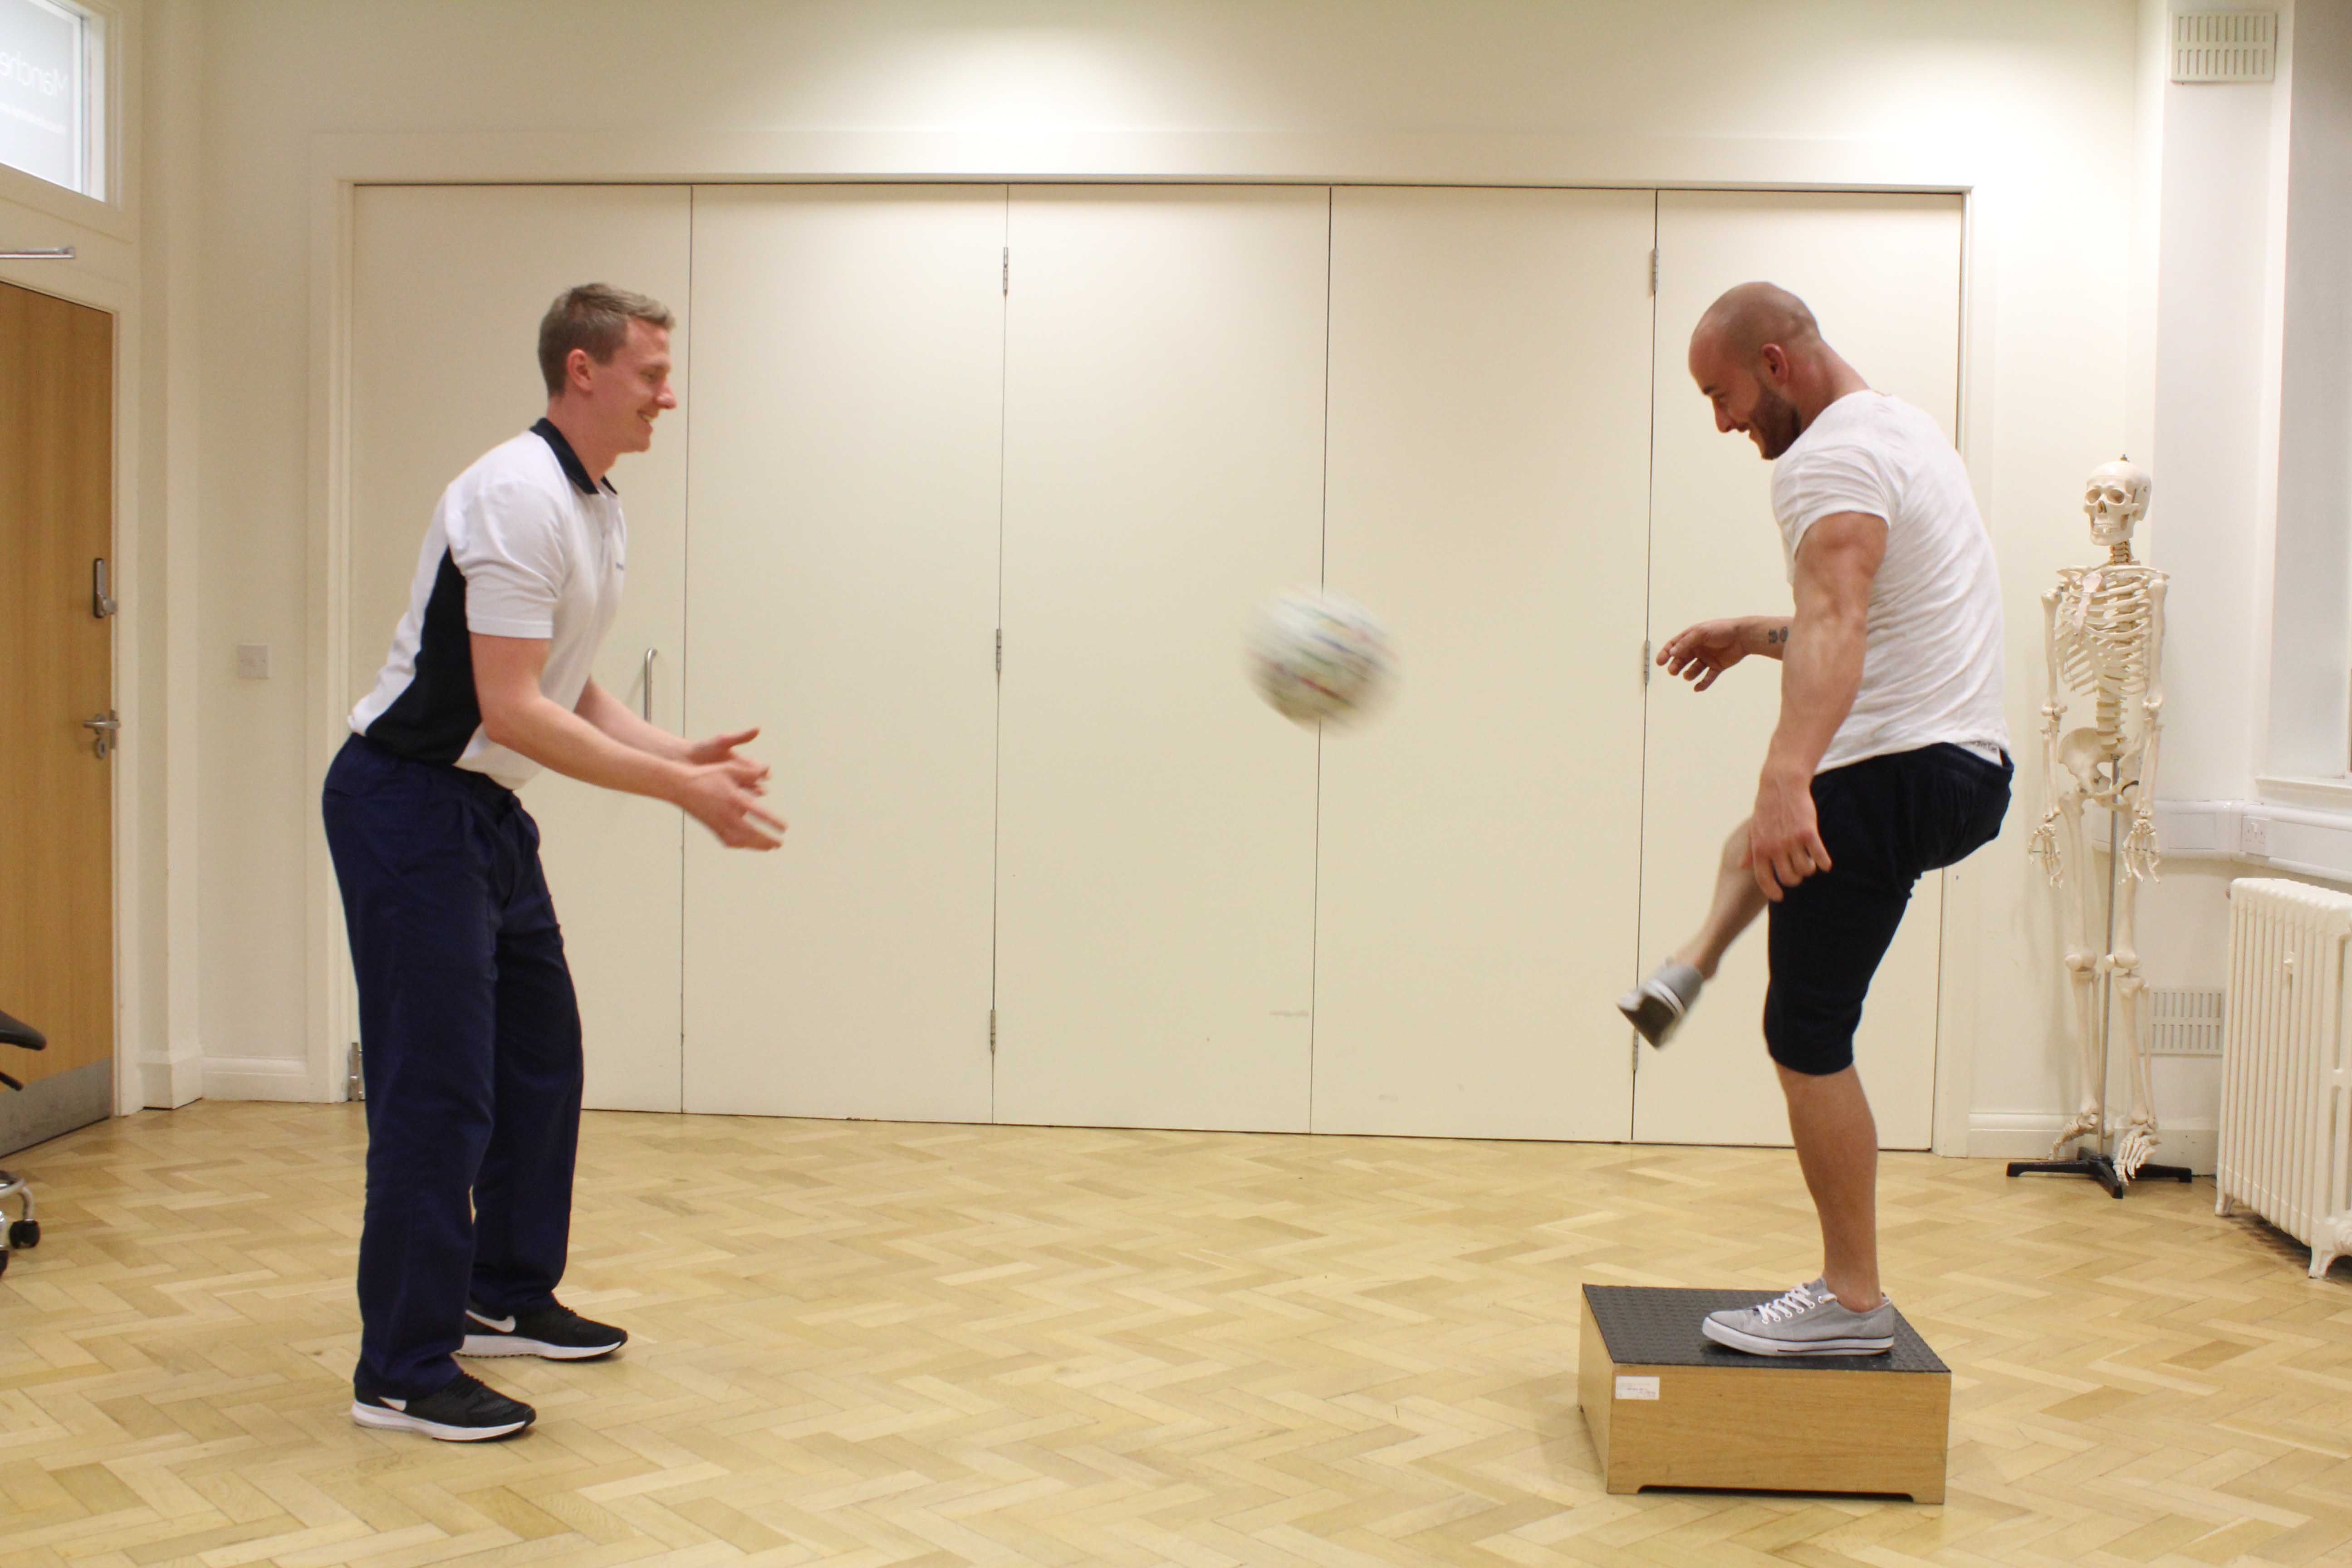 Dynamic balance and co-ordination exercises assisted by an experienced Physiotherapist